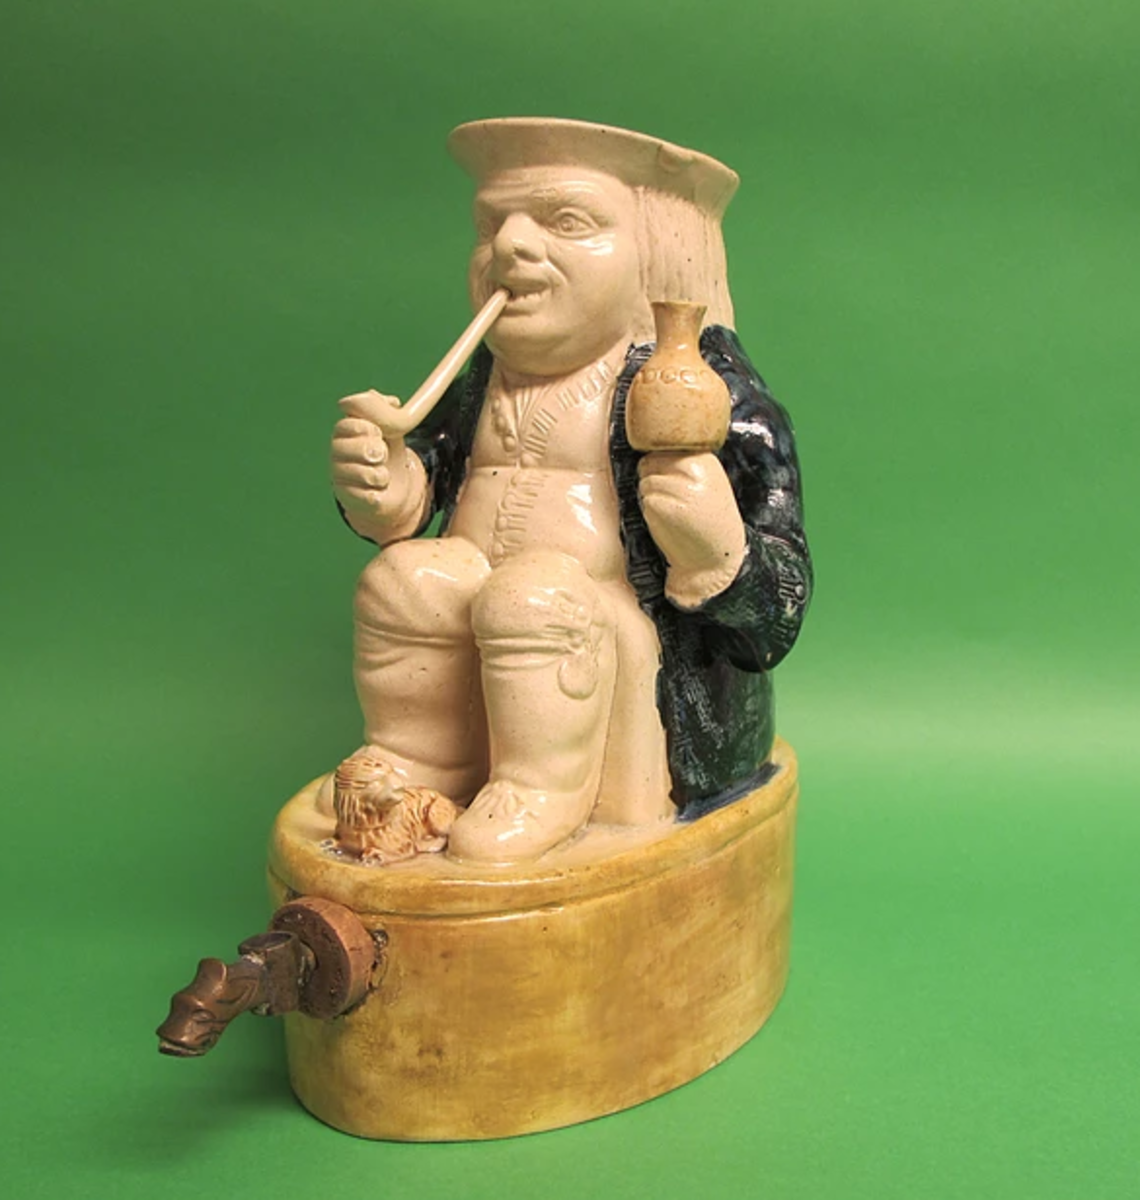 Toby jug on cask with spigot, 1780